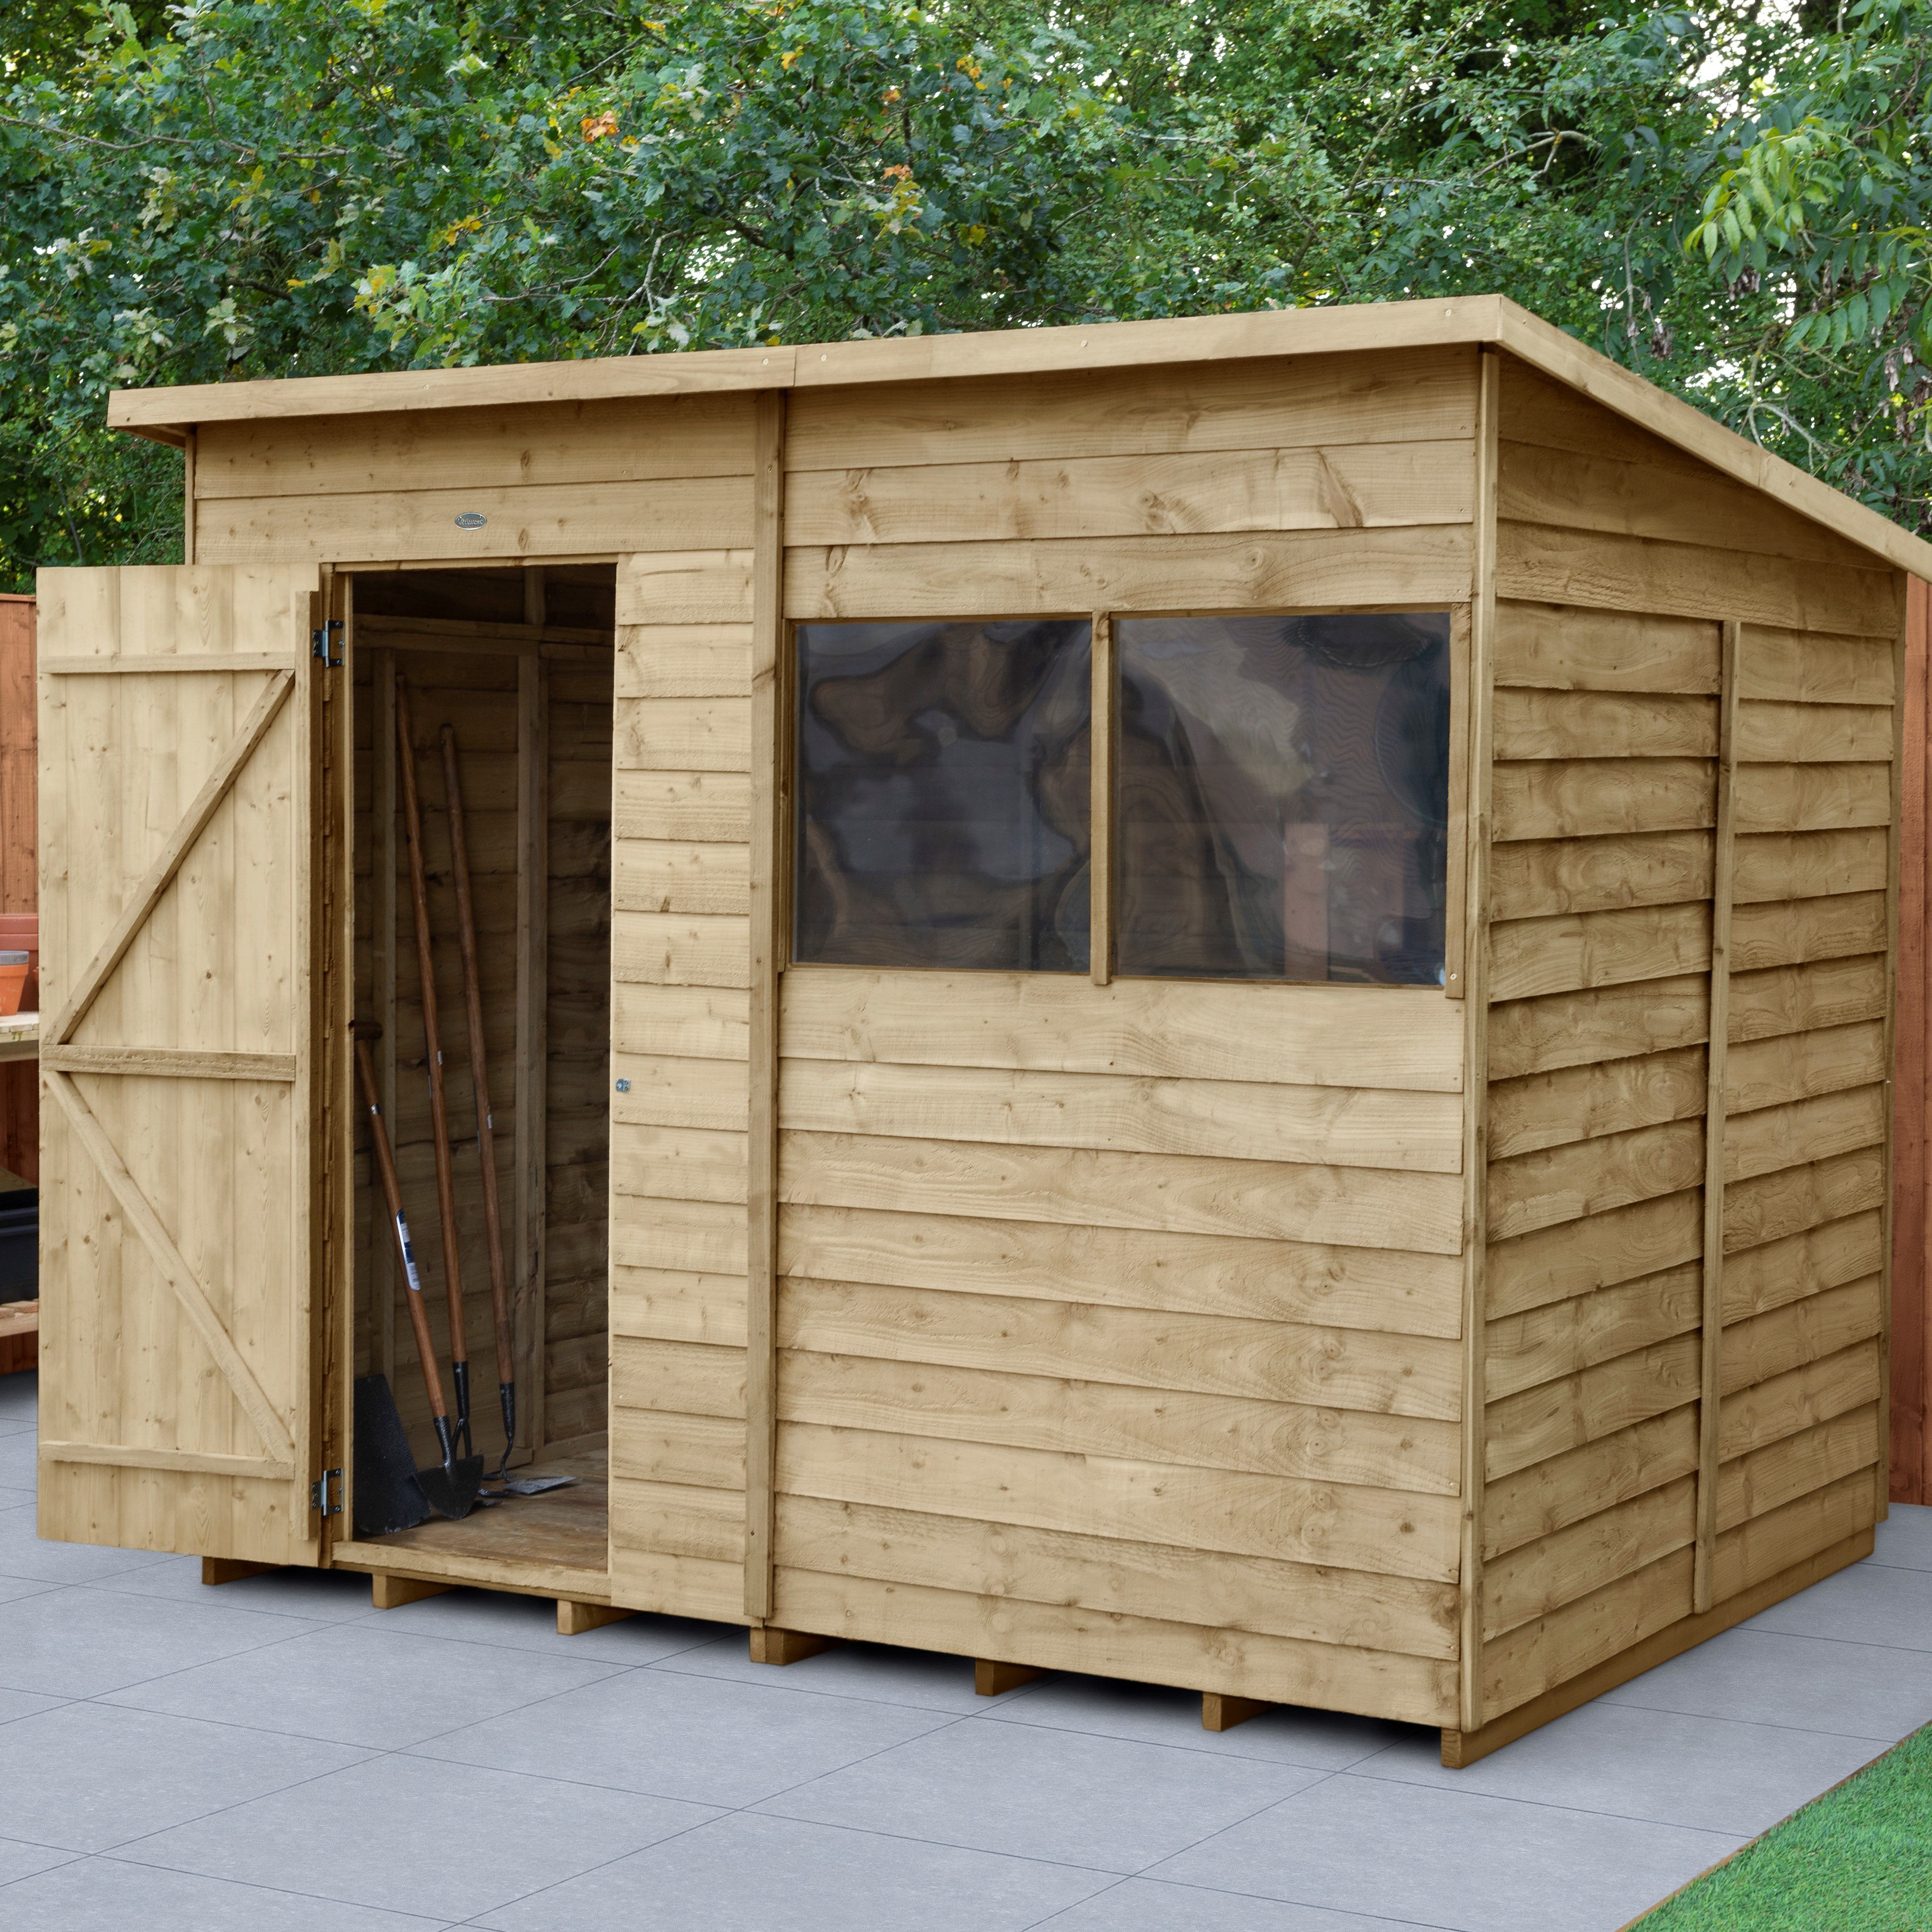 Forest Garden Overlap 8x6 ft Pent Wooden Pressure treated Shed with floor & 2 windows (Base included) - Assembly service included